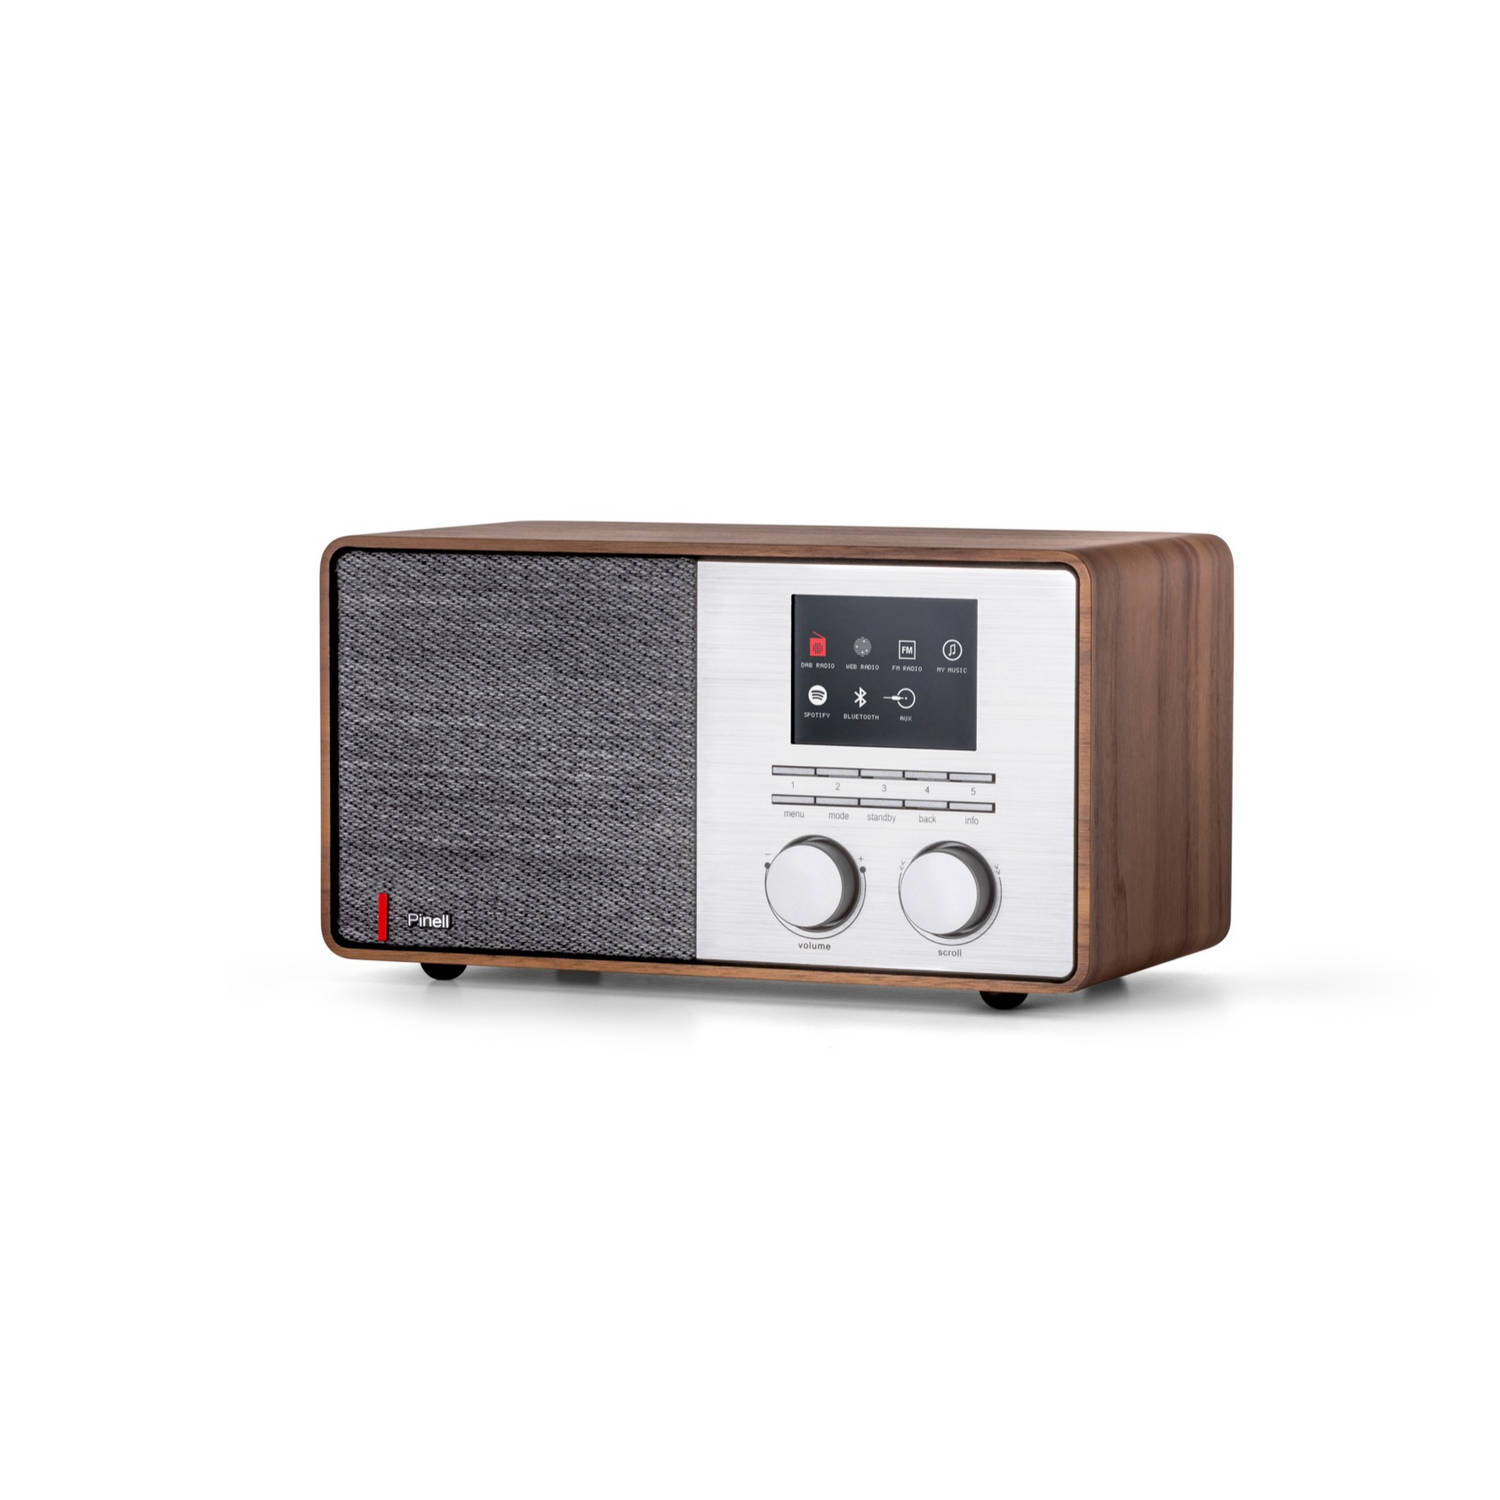 Pinell Supersound 301 Dab+ Internetradio Walnoot Hout